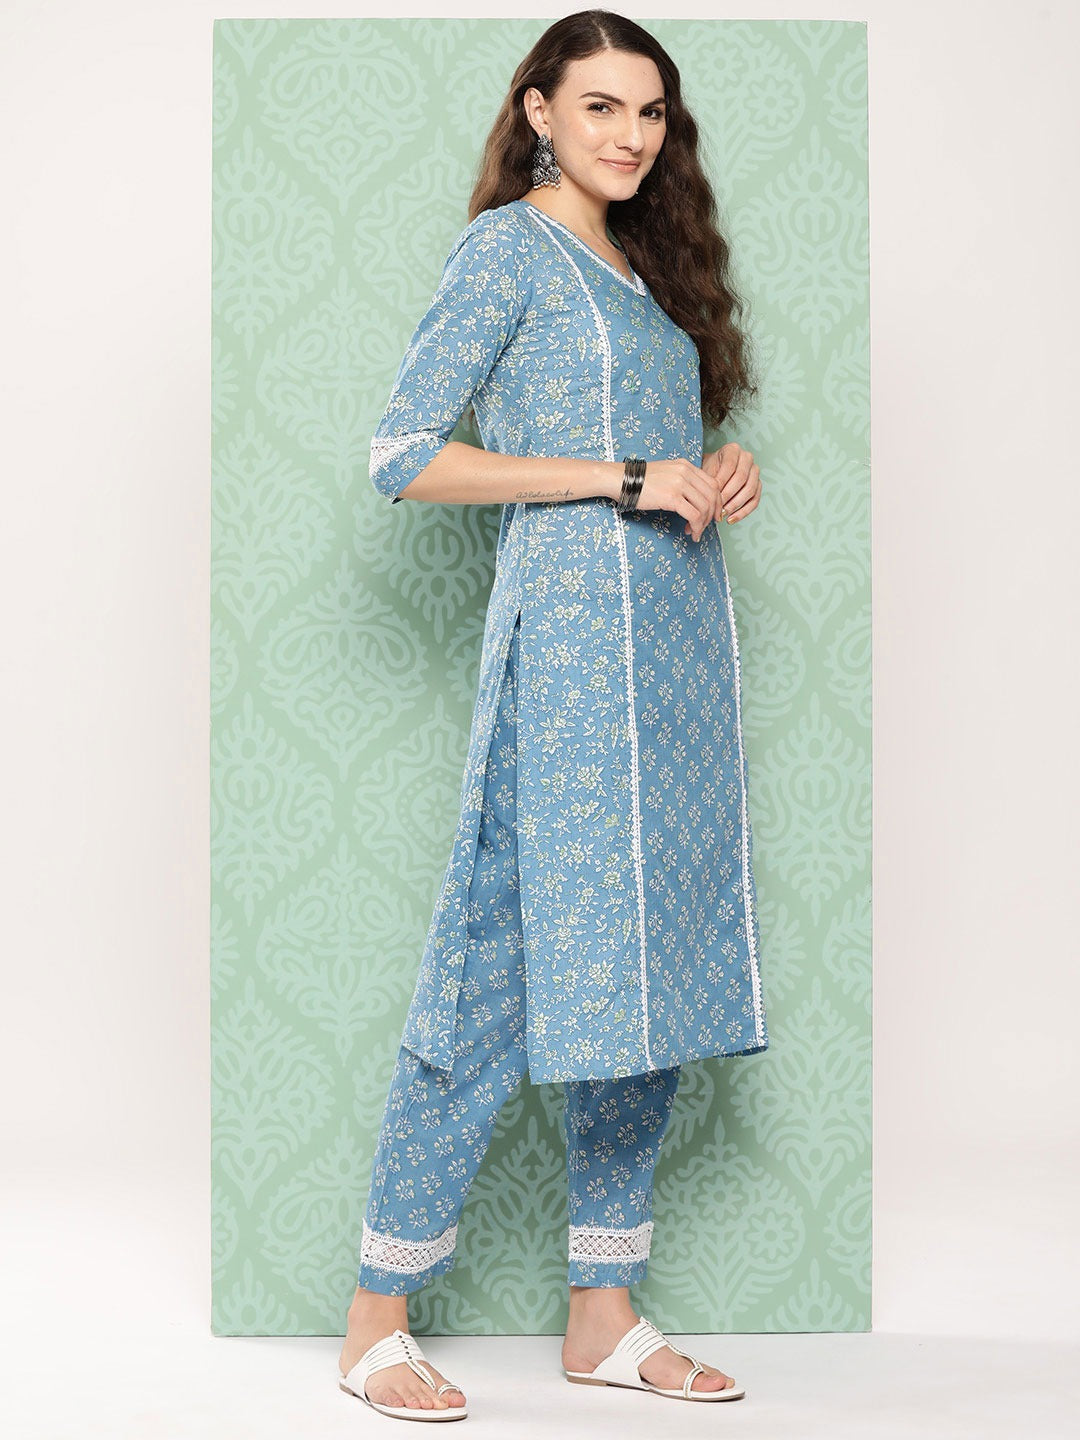 Blue Floral Printed Pure Cotton Kurta With Trouser And Dupatta